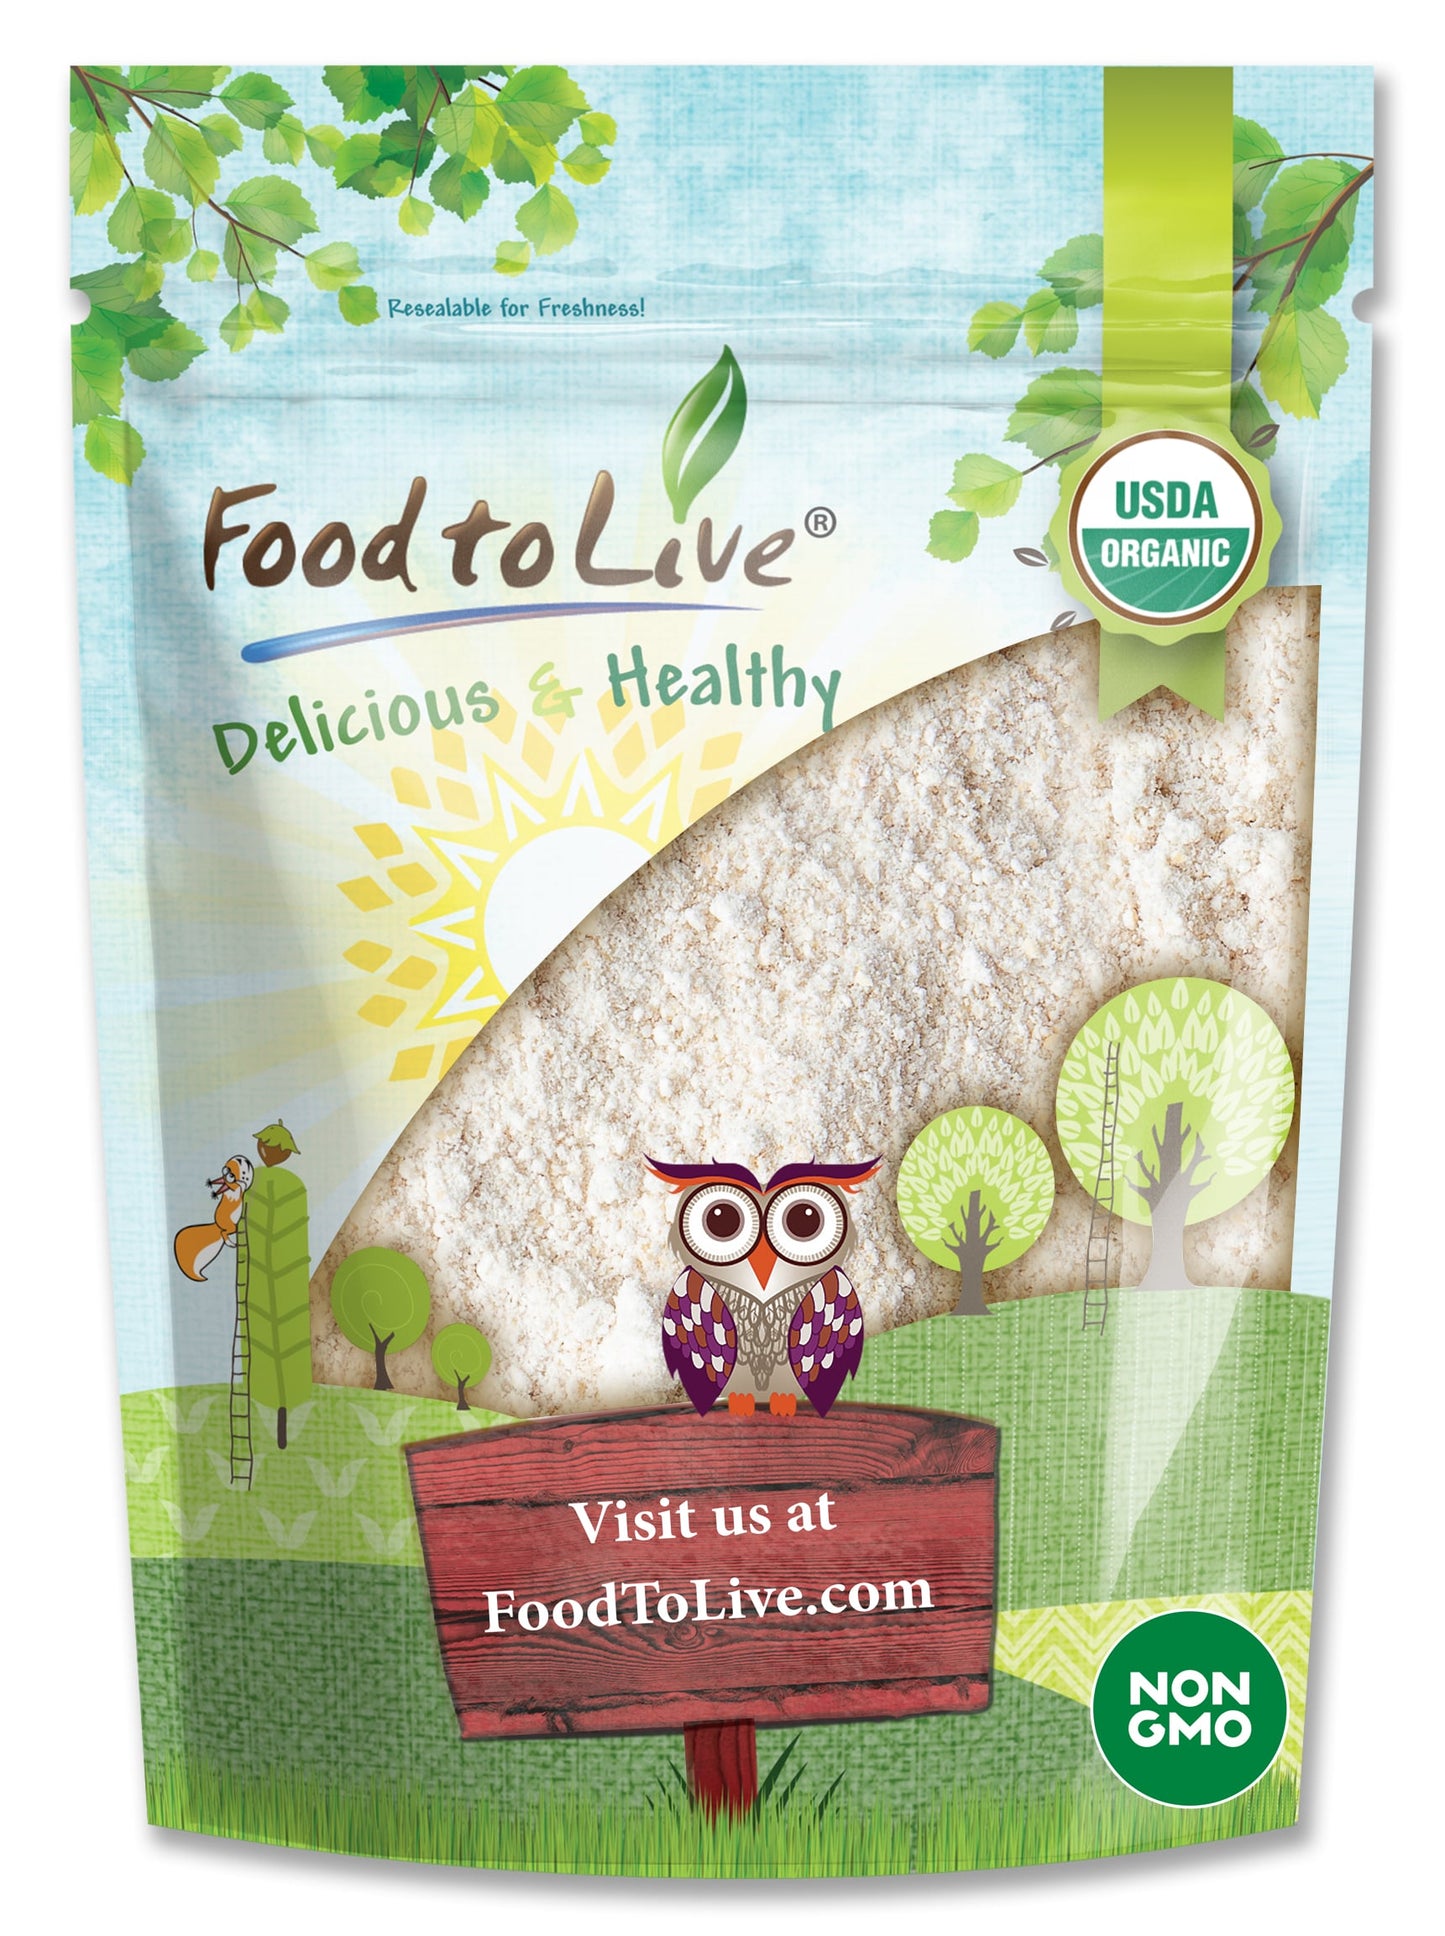 Organic Oat Flour - Non-GMO, Fine, Stone Ground from Whole Grain Oat Berries, Kosher, Vegan, Bulk, Great for Baking - by Food to Live